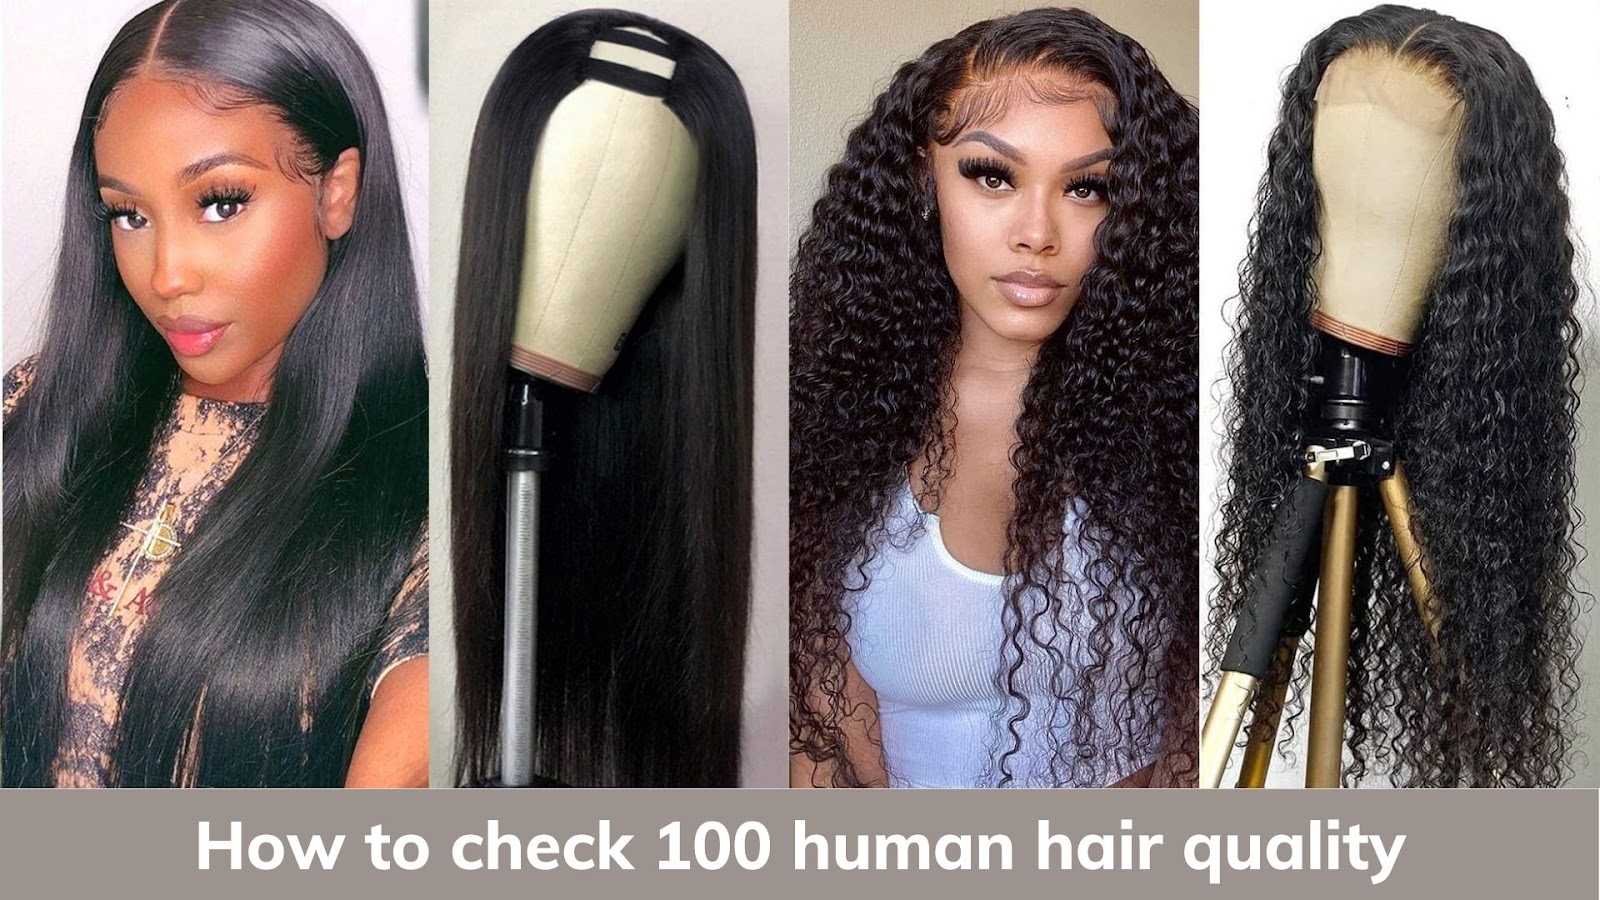 How to check 100 human hair quality